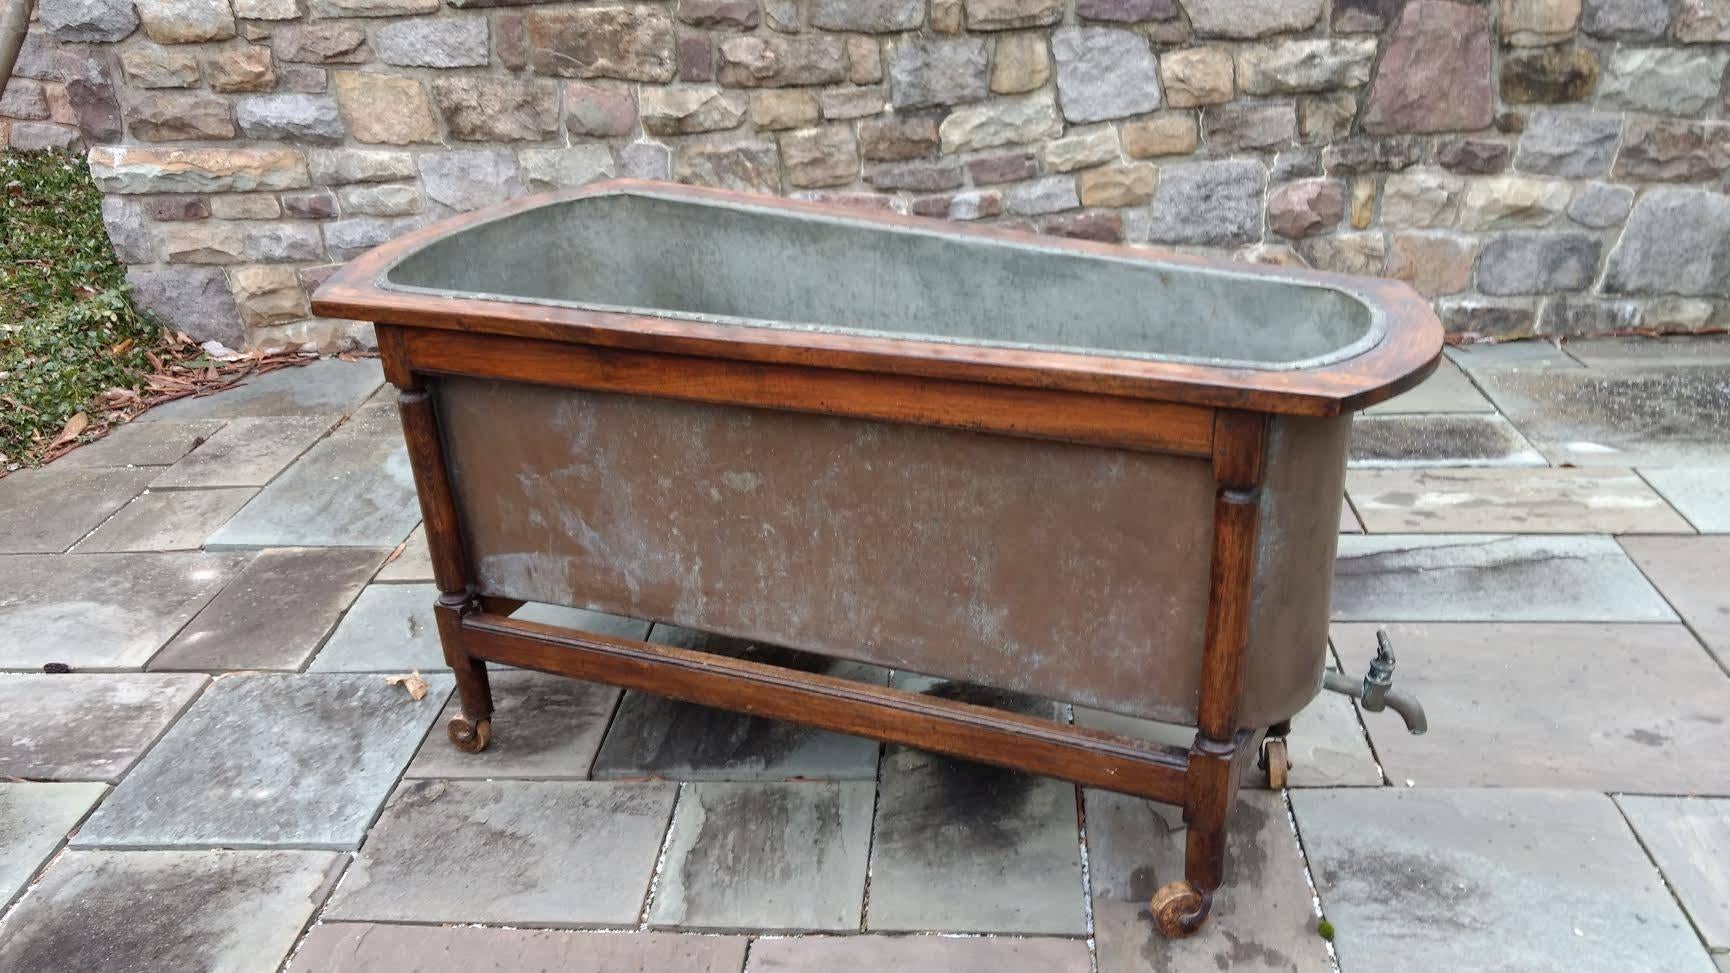 A mid-19th century French copper bathtub with walnut frame. The copper is tin or zinc lined and shows all original patination. Some repairs to the seams shows this has been well cared for more than a century. The depth of the tub interior is 19